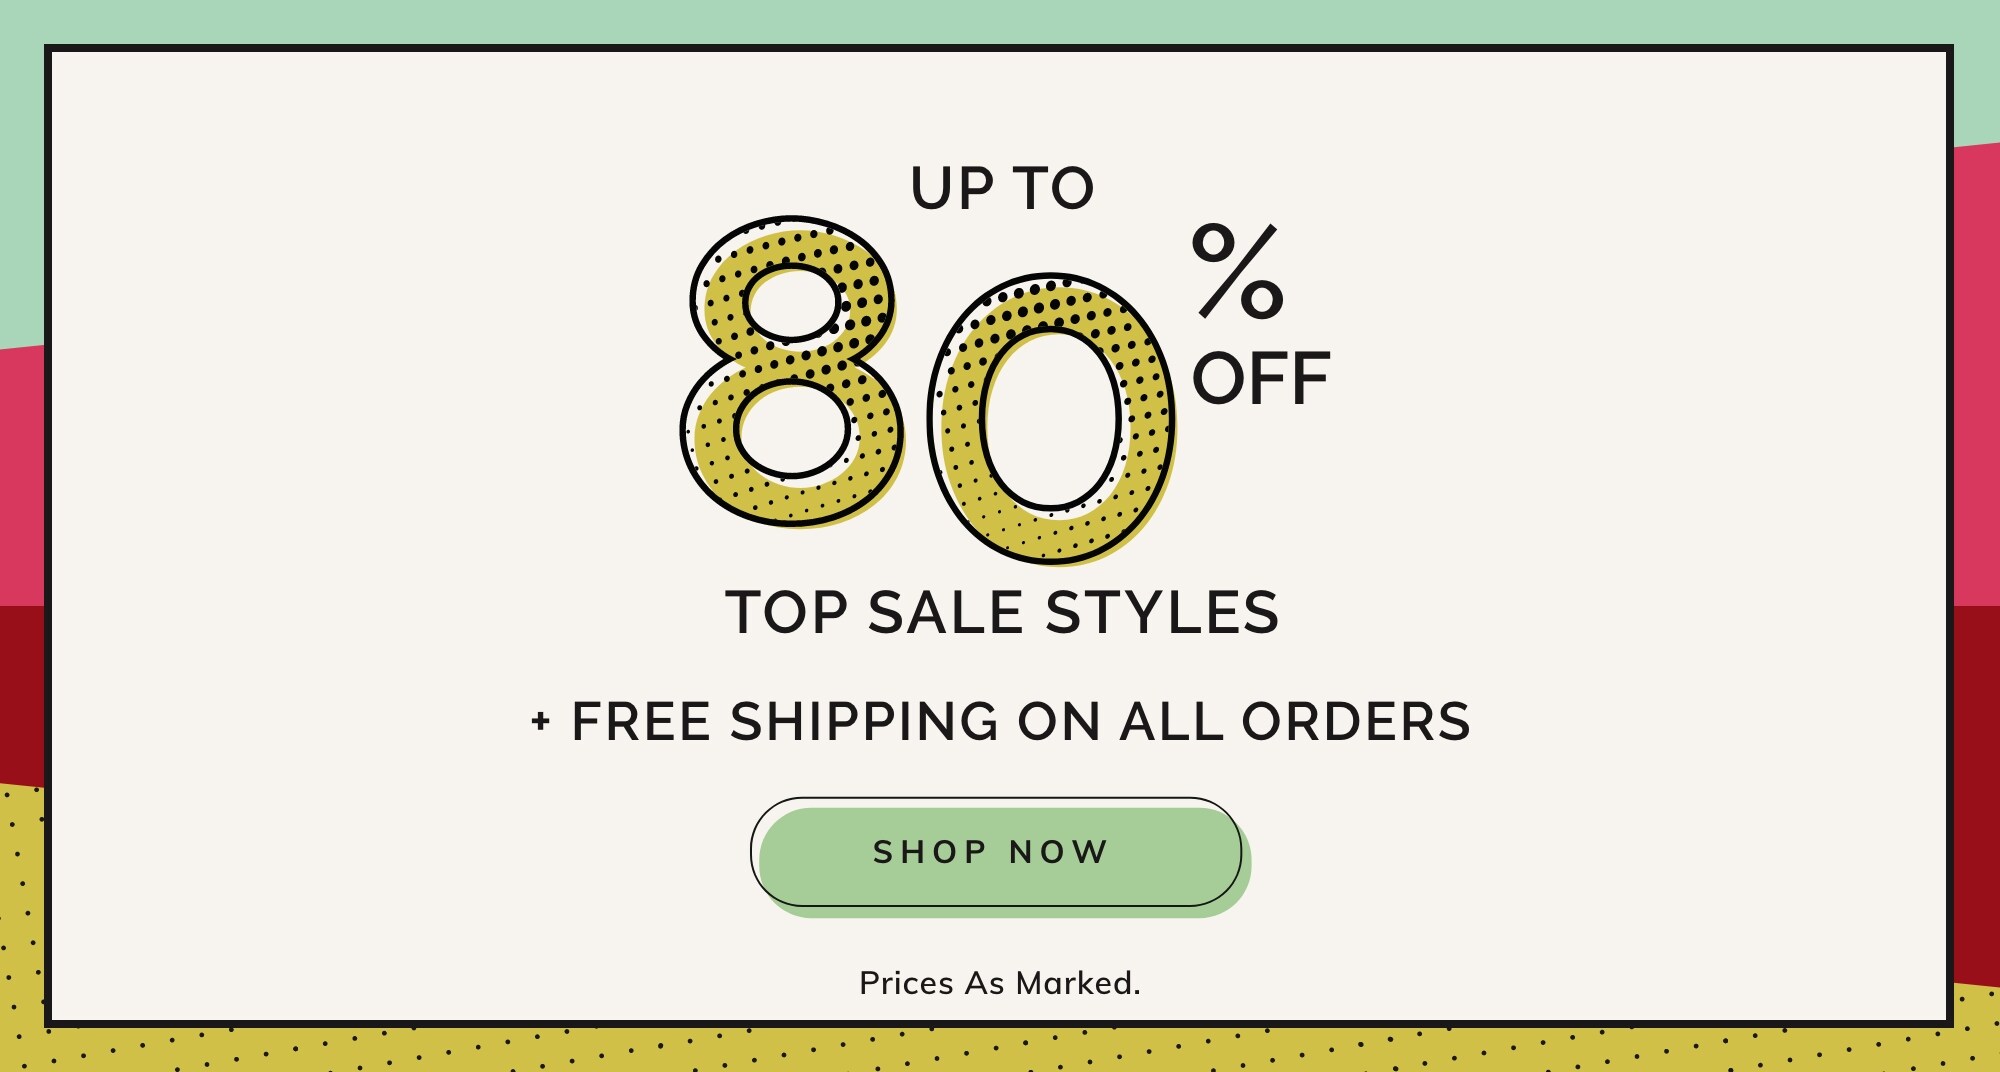 UP TO 80% OFF* TOP SALE STYLES + FREE DELIVERY ON ALL ORDERS